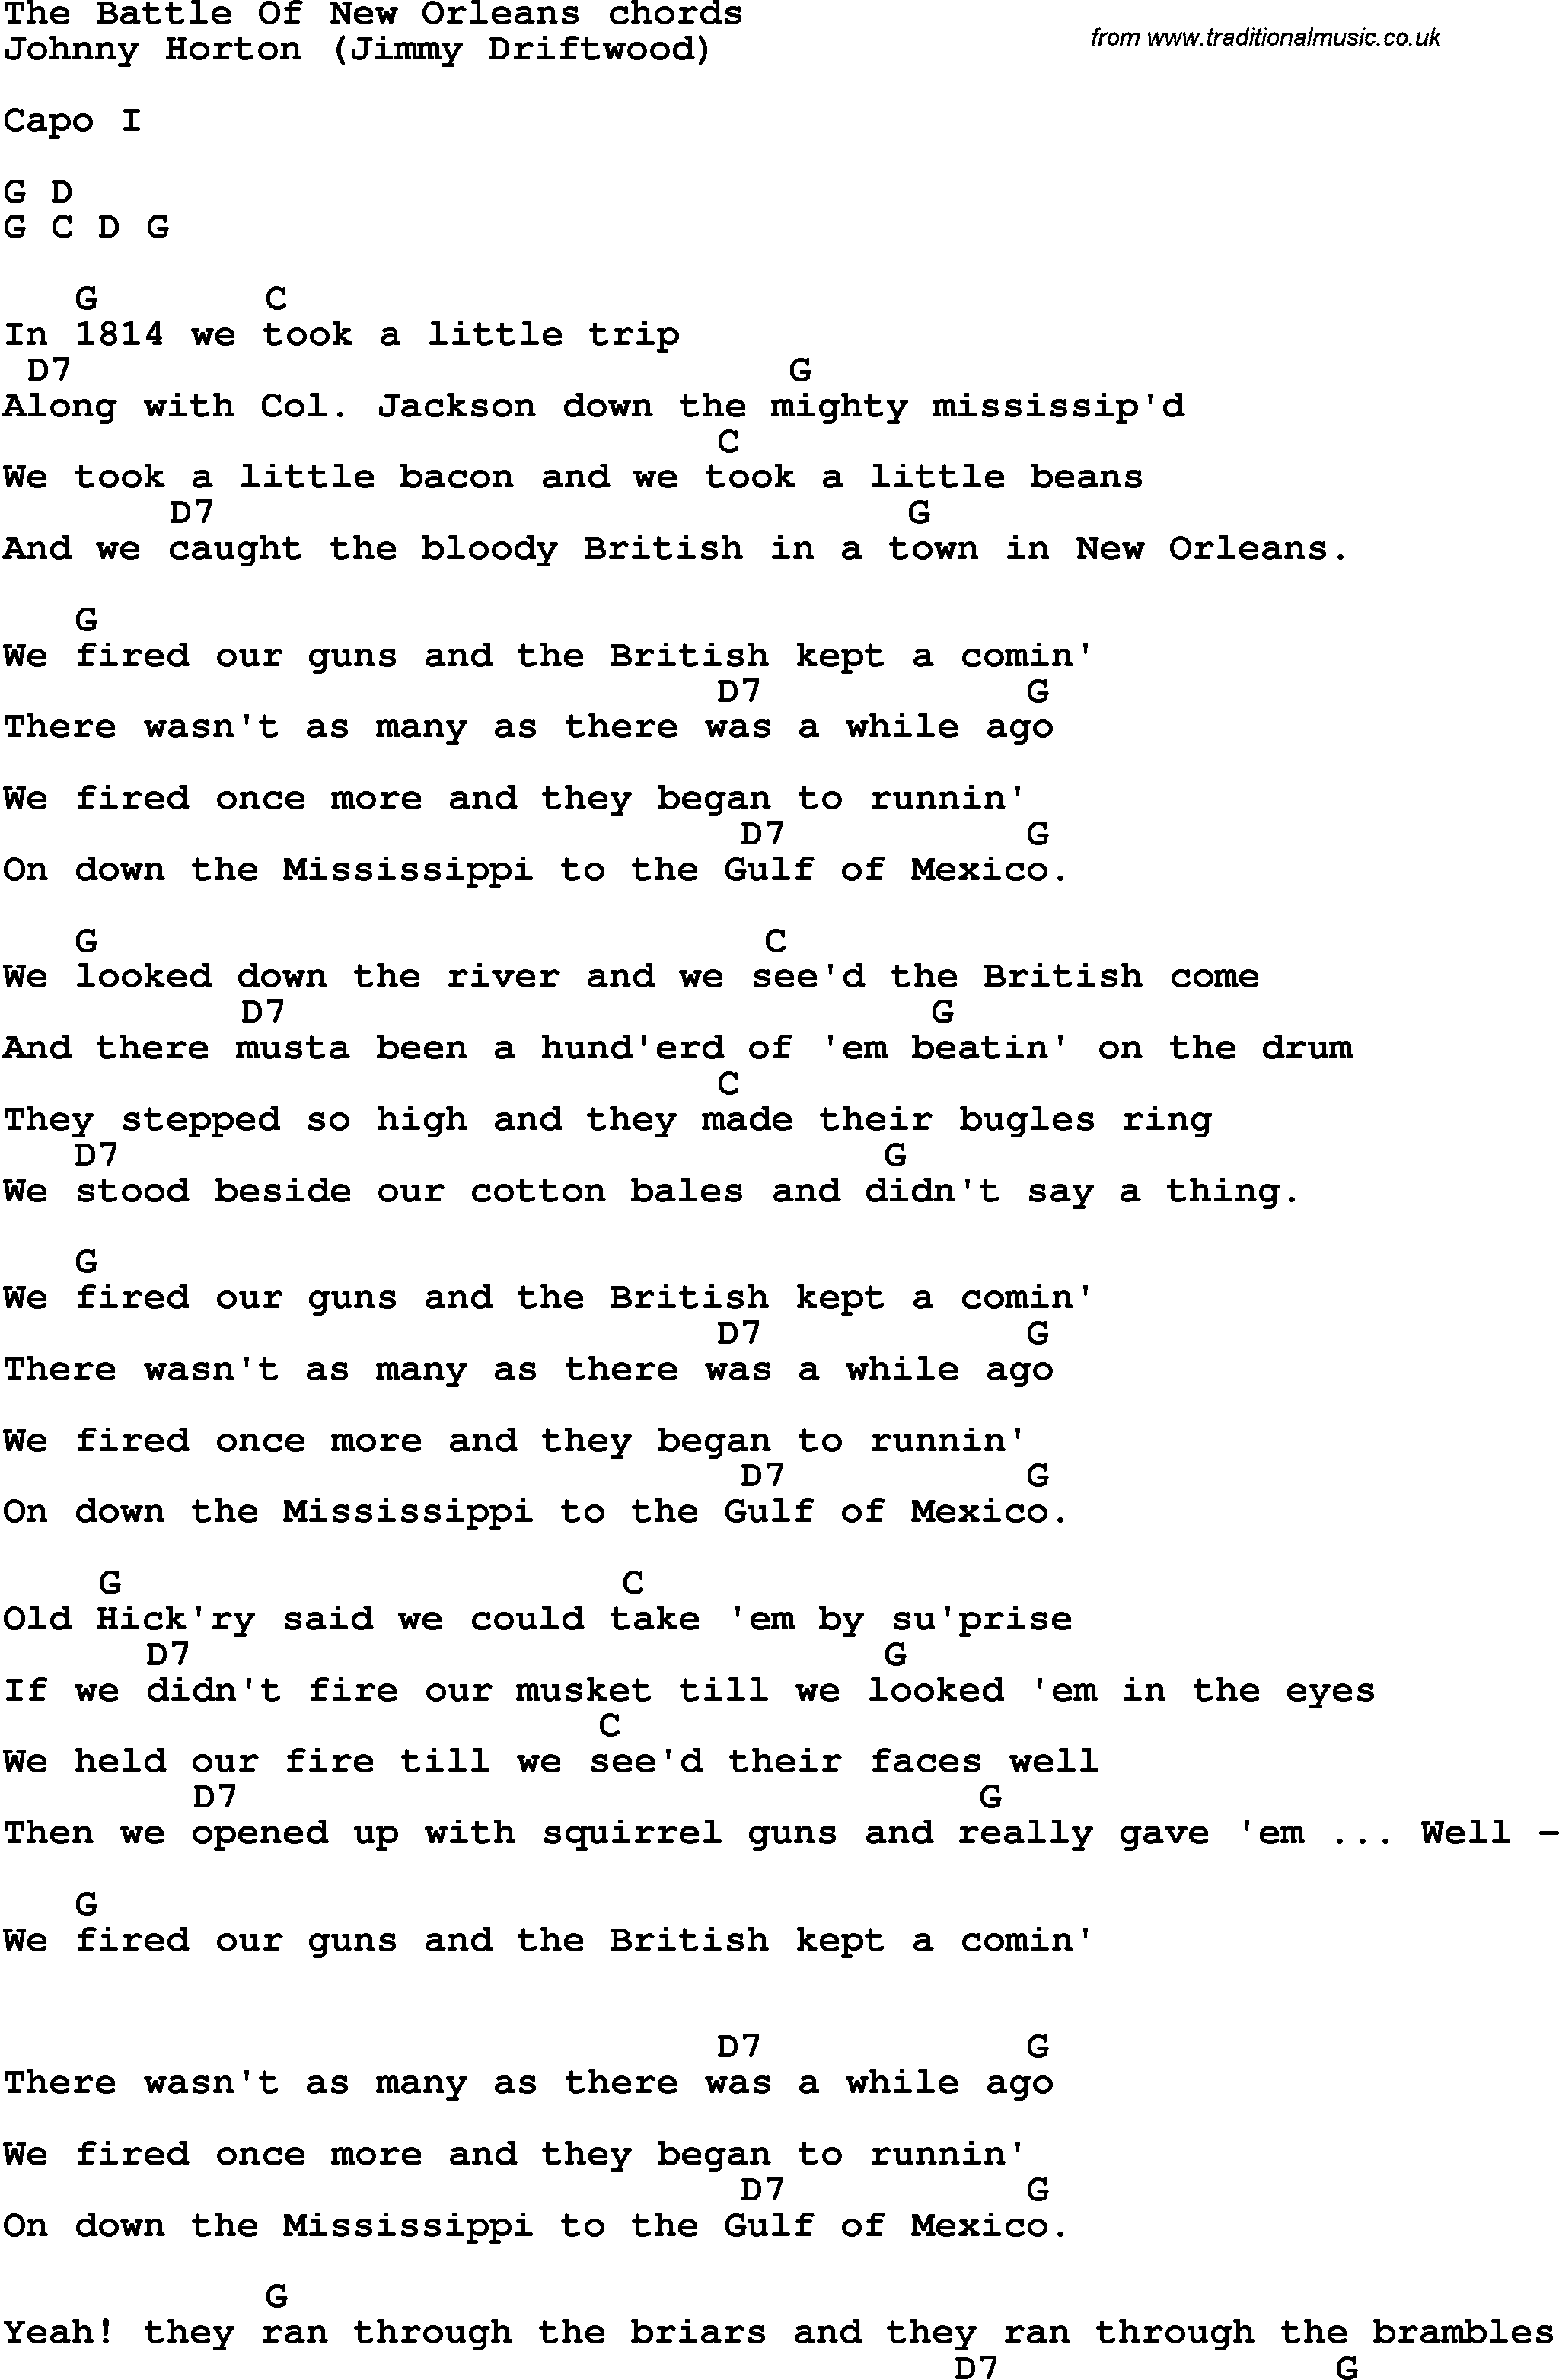 Song Lyrics with guitar chords for The Battle Of New Orleans